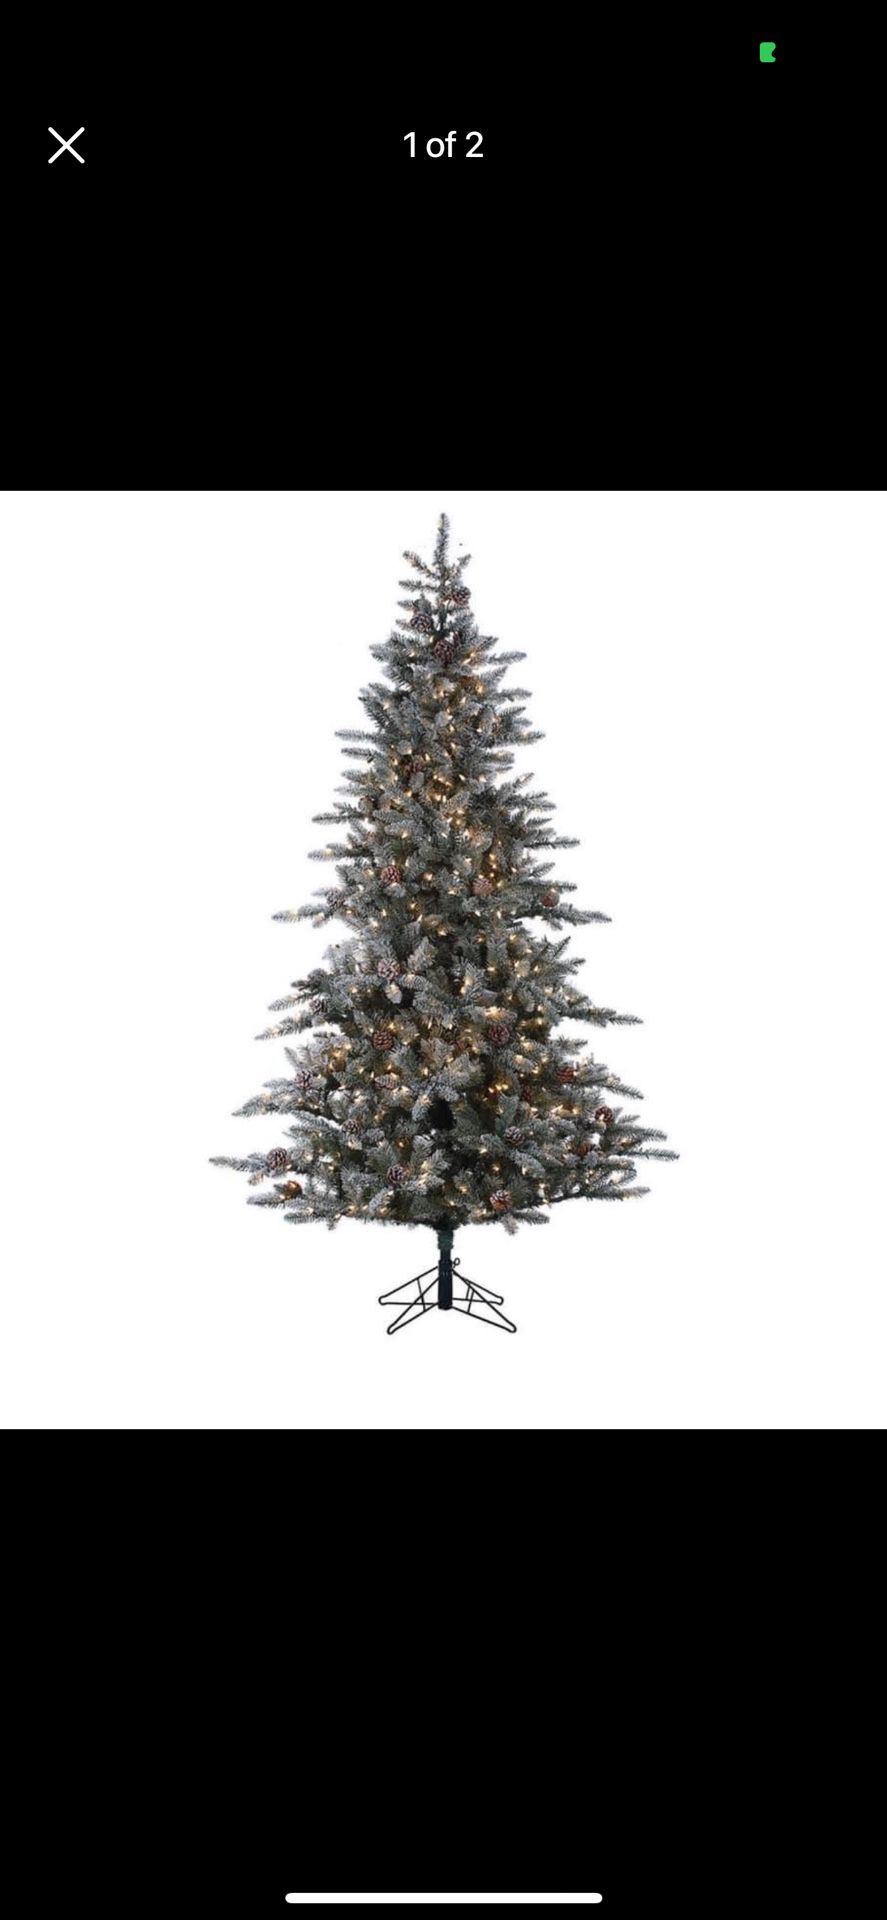 7.5' ft. Pre-Lit Lightly Flocked McKinley Pine Artificial Christmas Tree